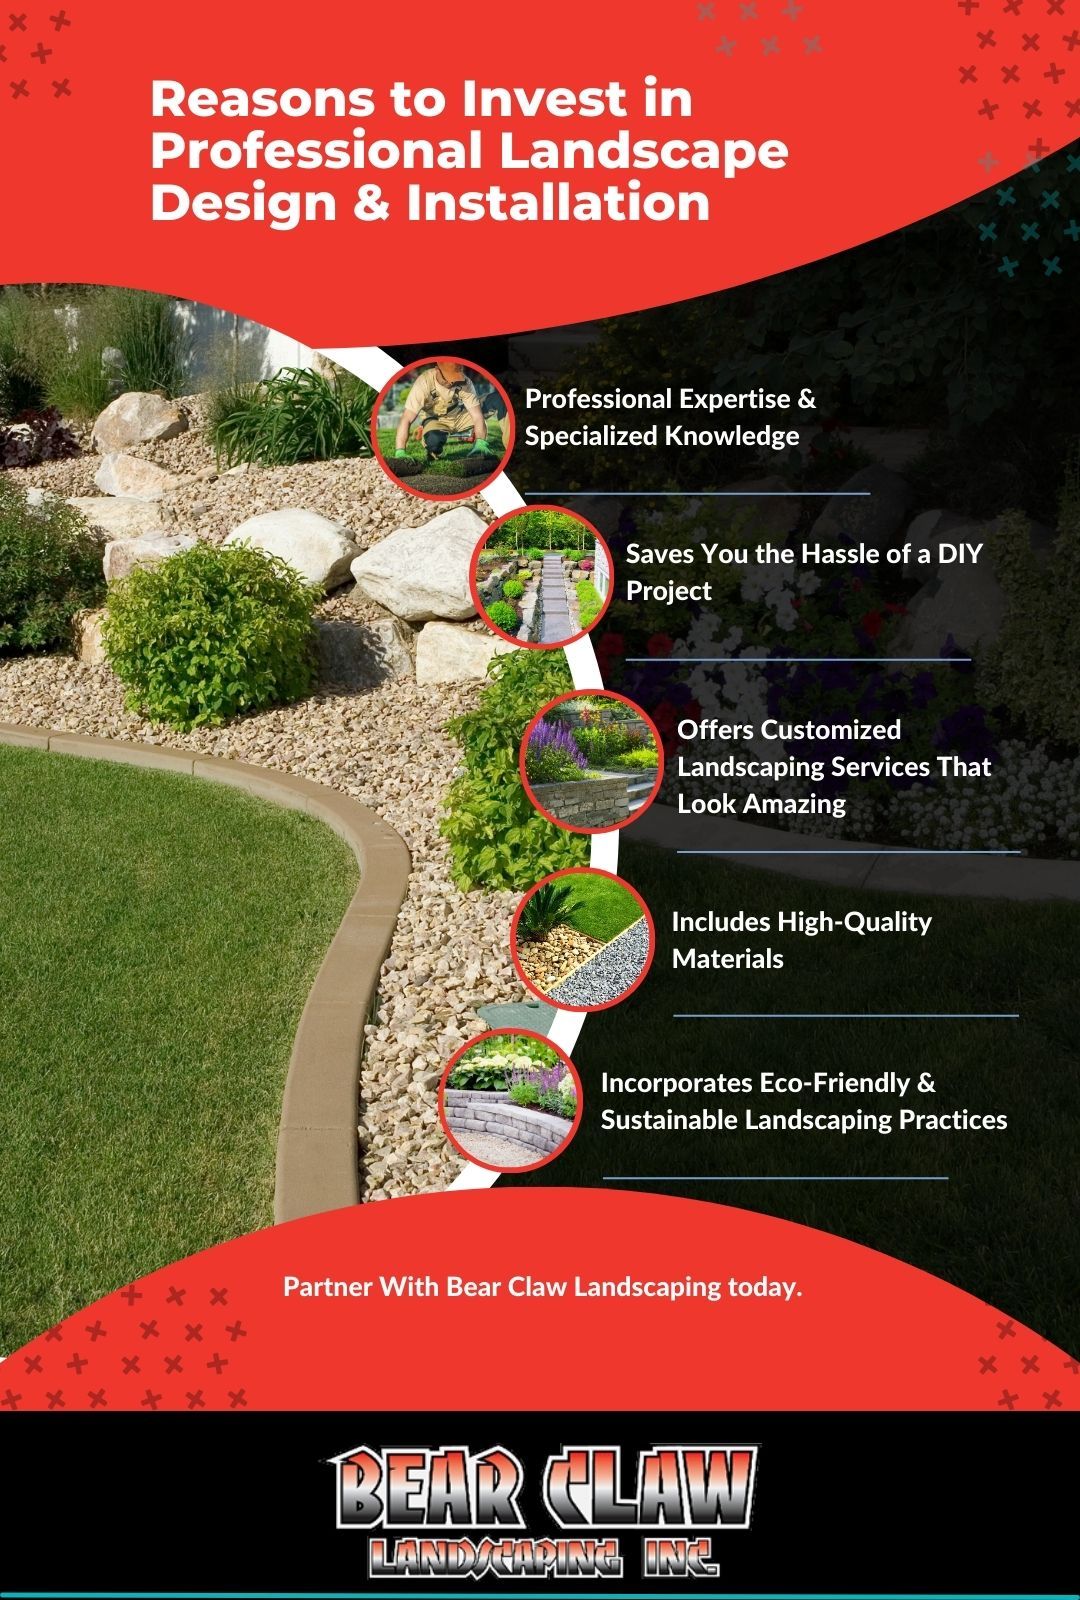  Reasons to Invest in Professional Landscape Design & Installation